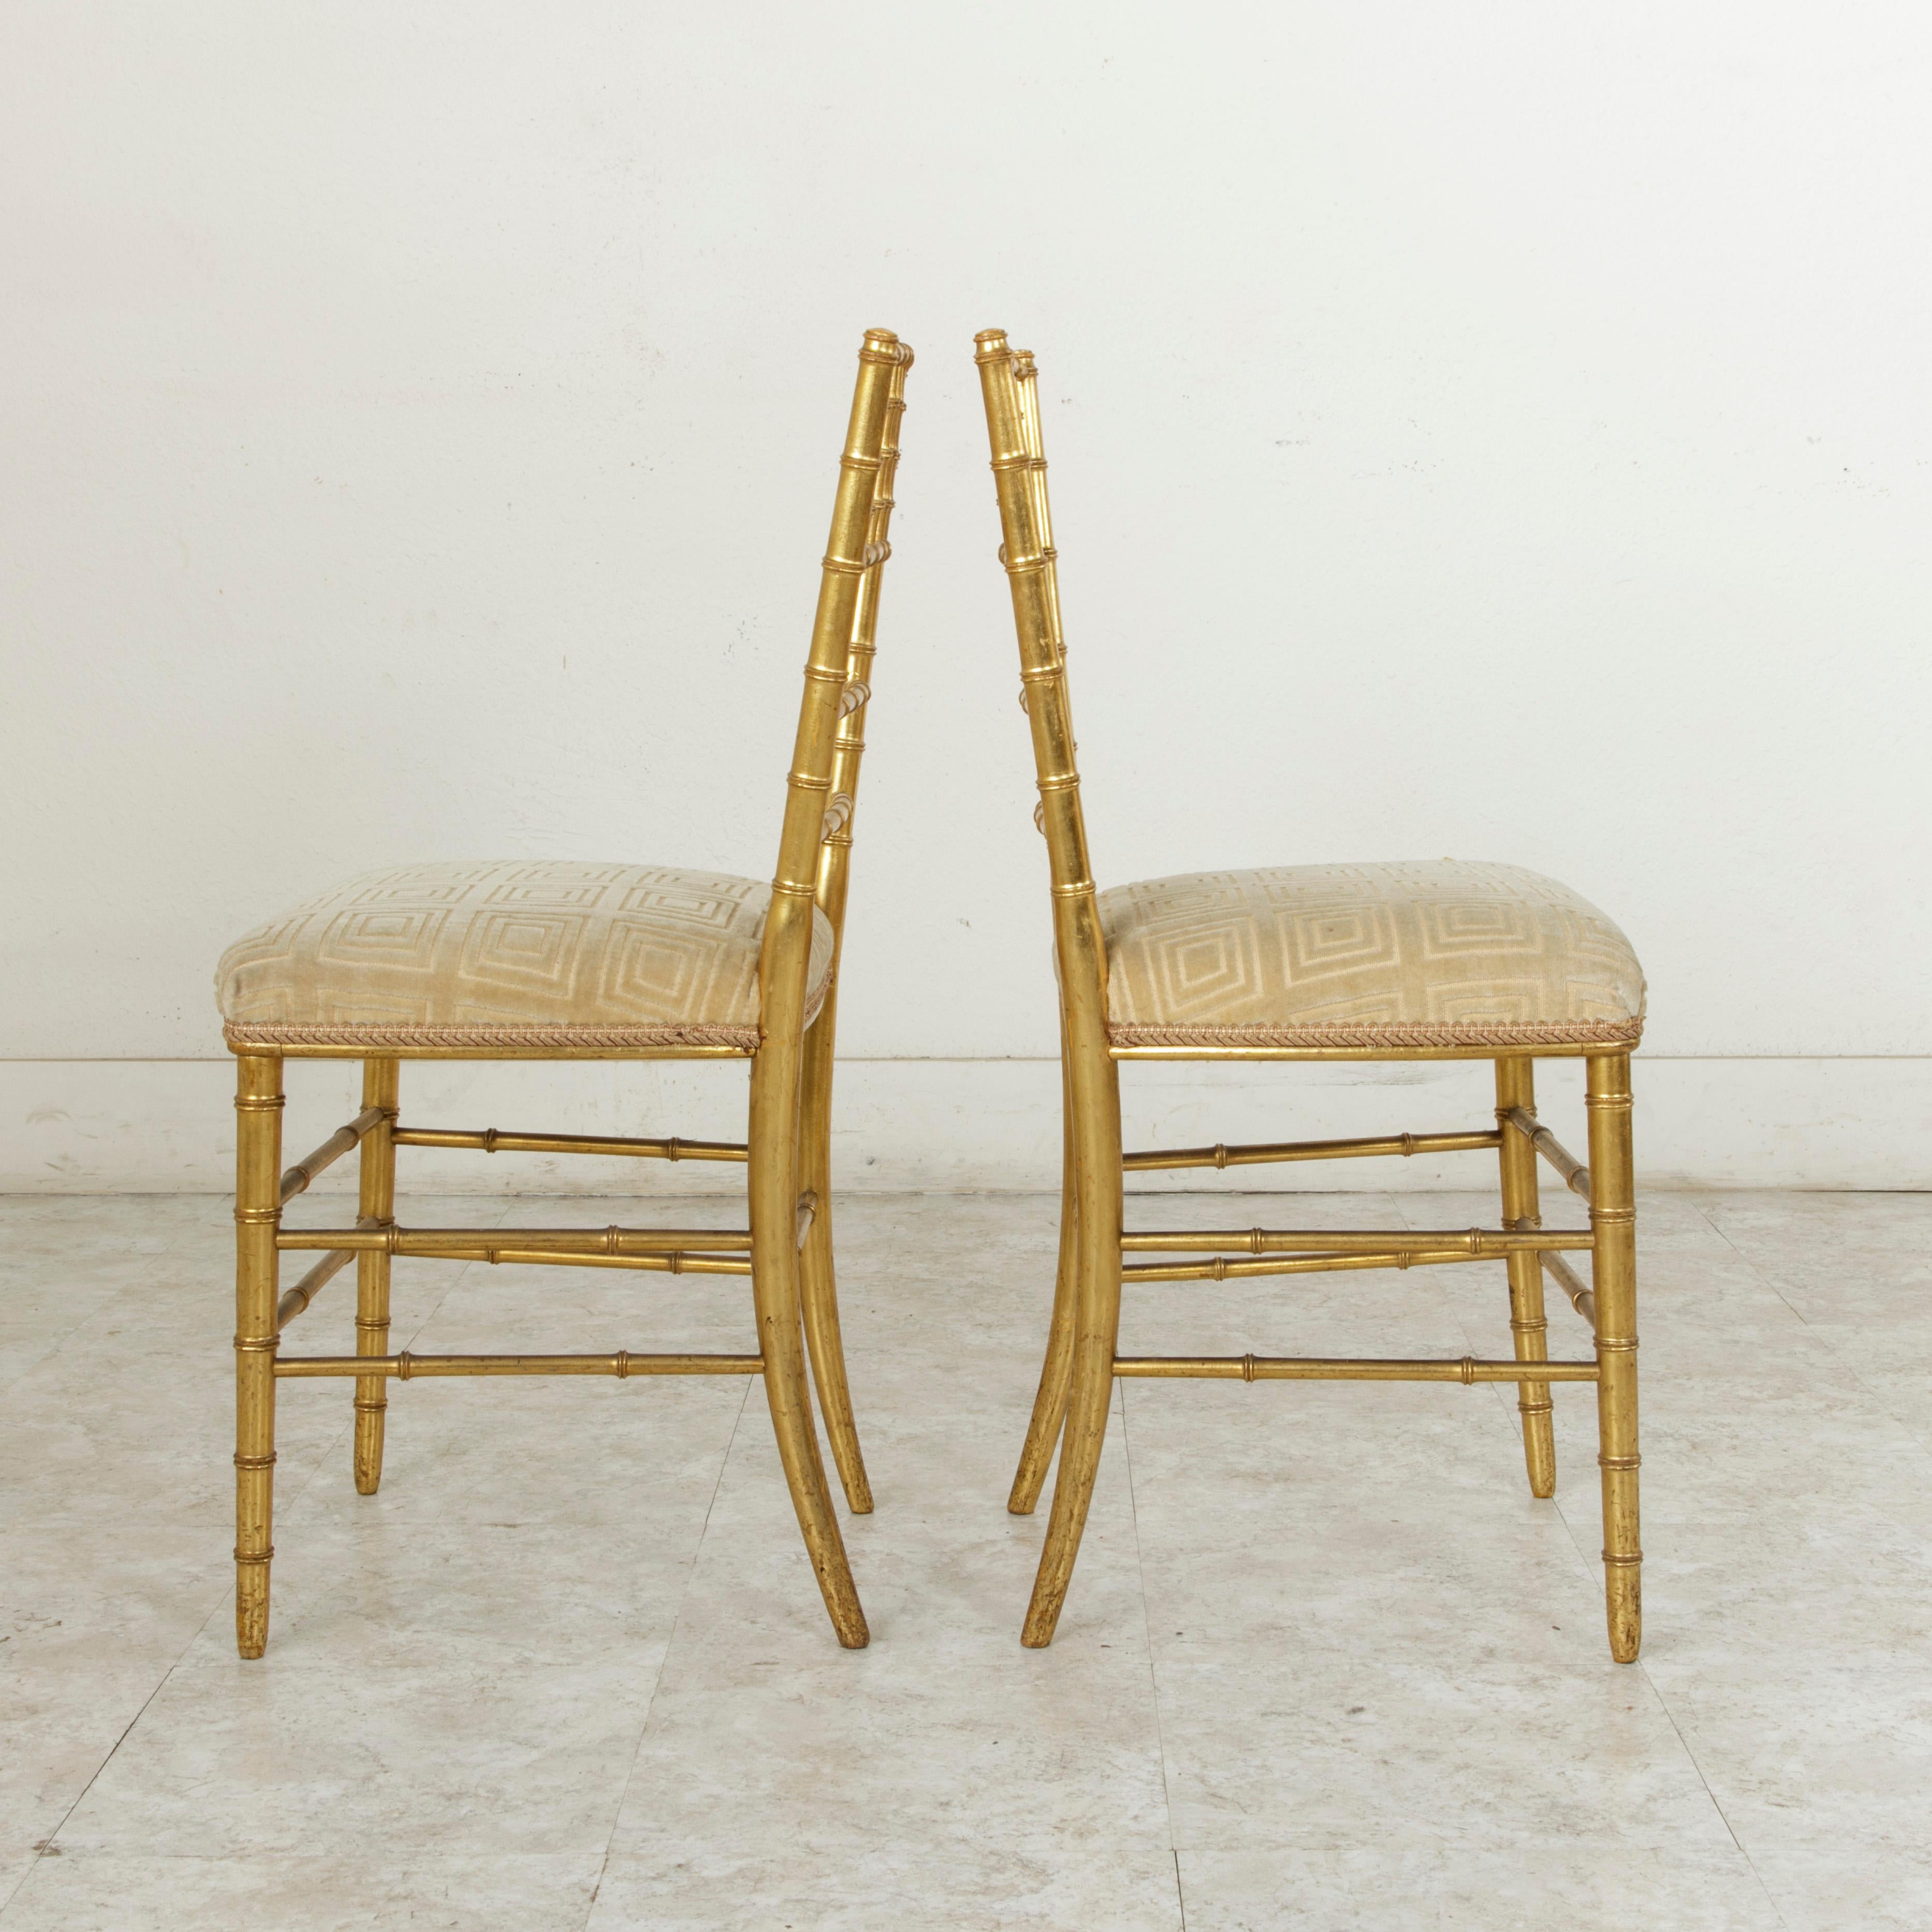 Early 20th Century Pair of French Giltwood Faux Bamboo Opera Chairs, Side Chairs, circa 1900